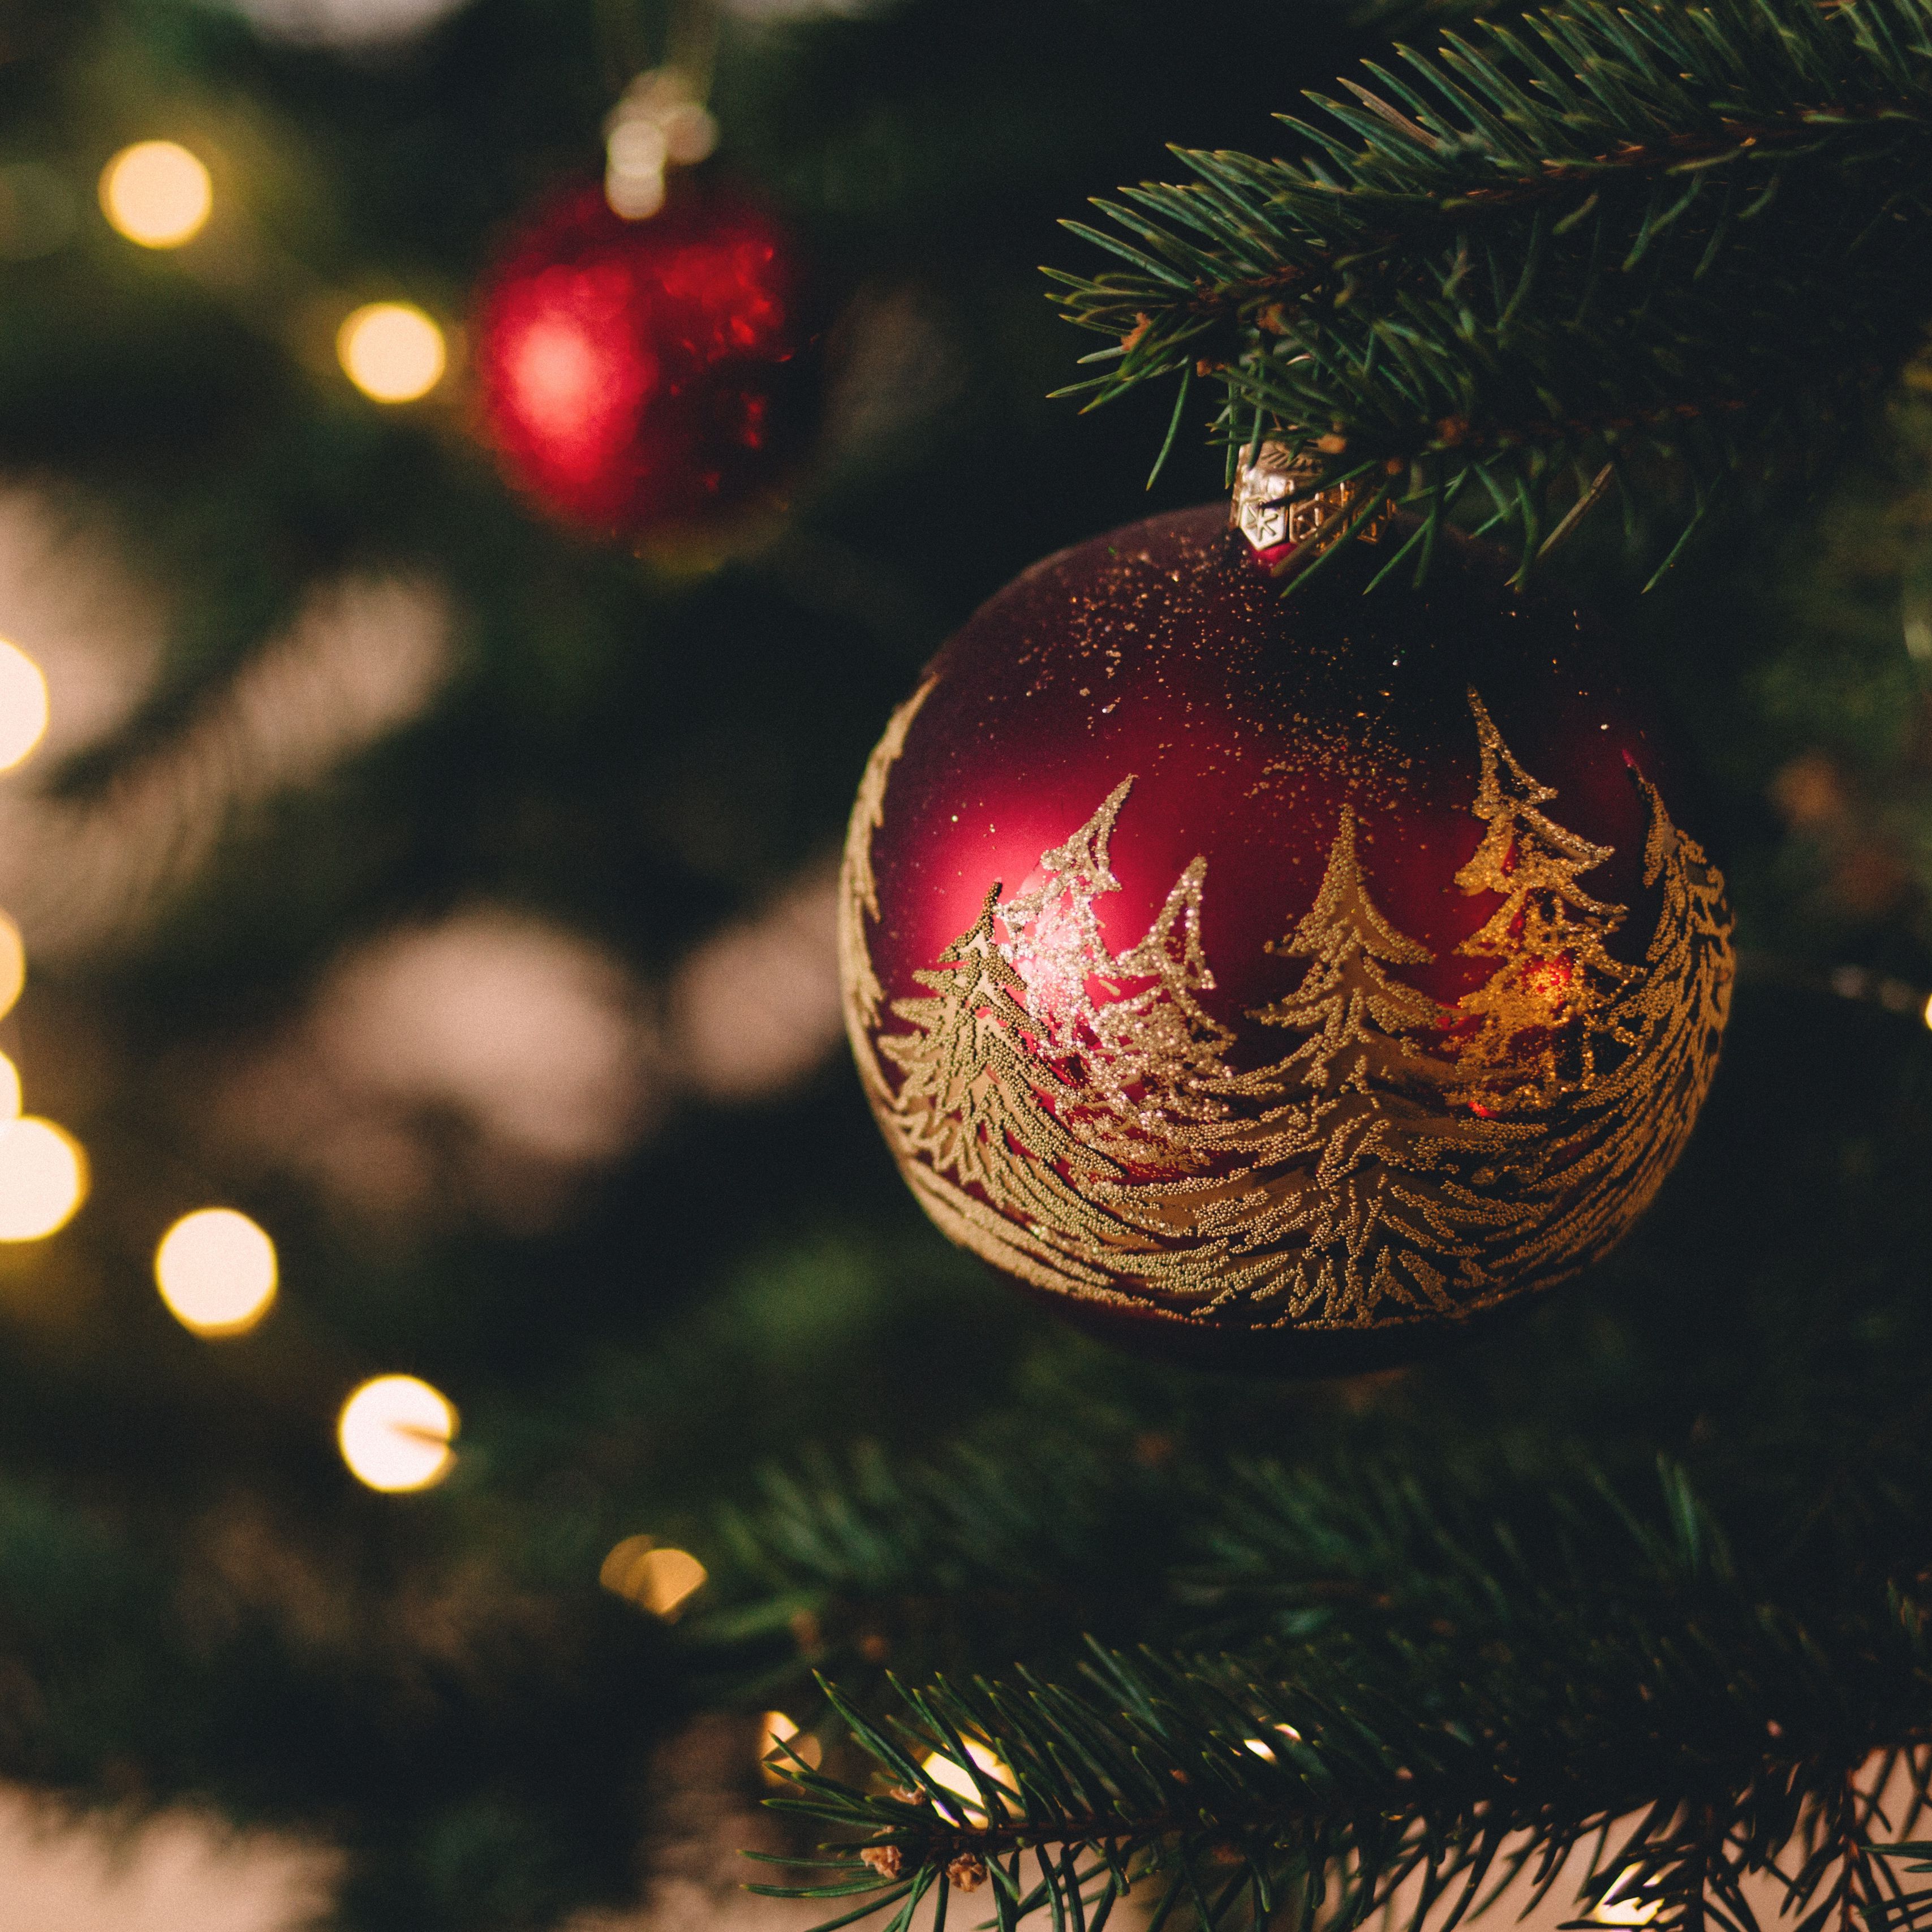 Download wallpaper 3415x3415 christmas tree, ball, decoration, new year, christmas ipad pro 12.9 retina for parallax HD background